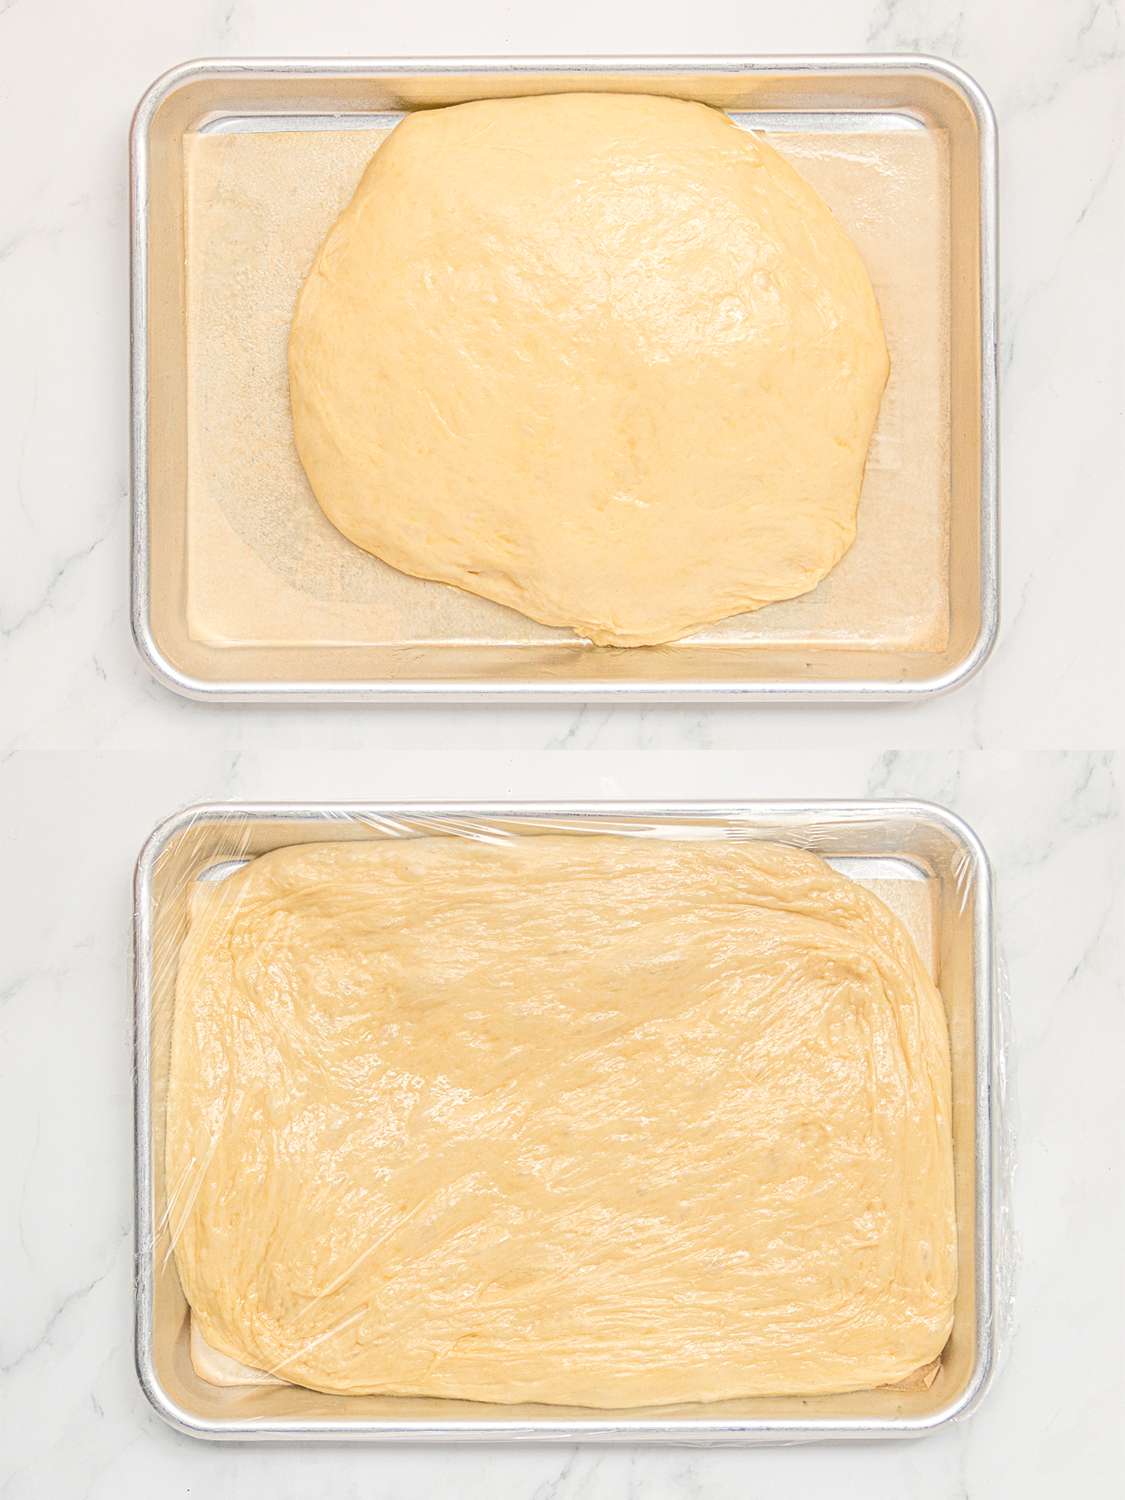 Two image collage of dough before and after being proofed on baking sheet